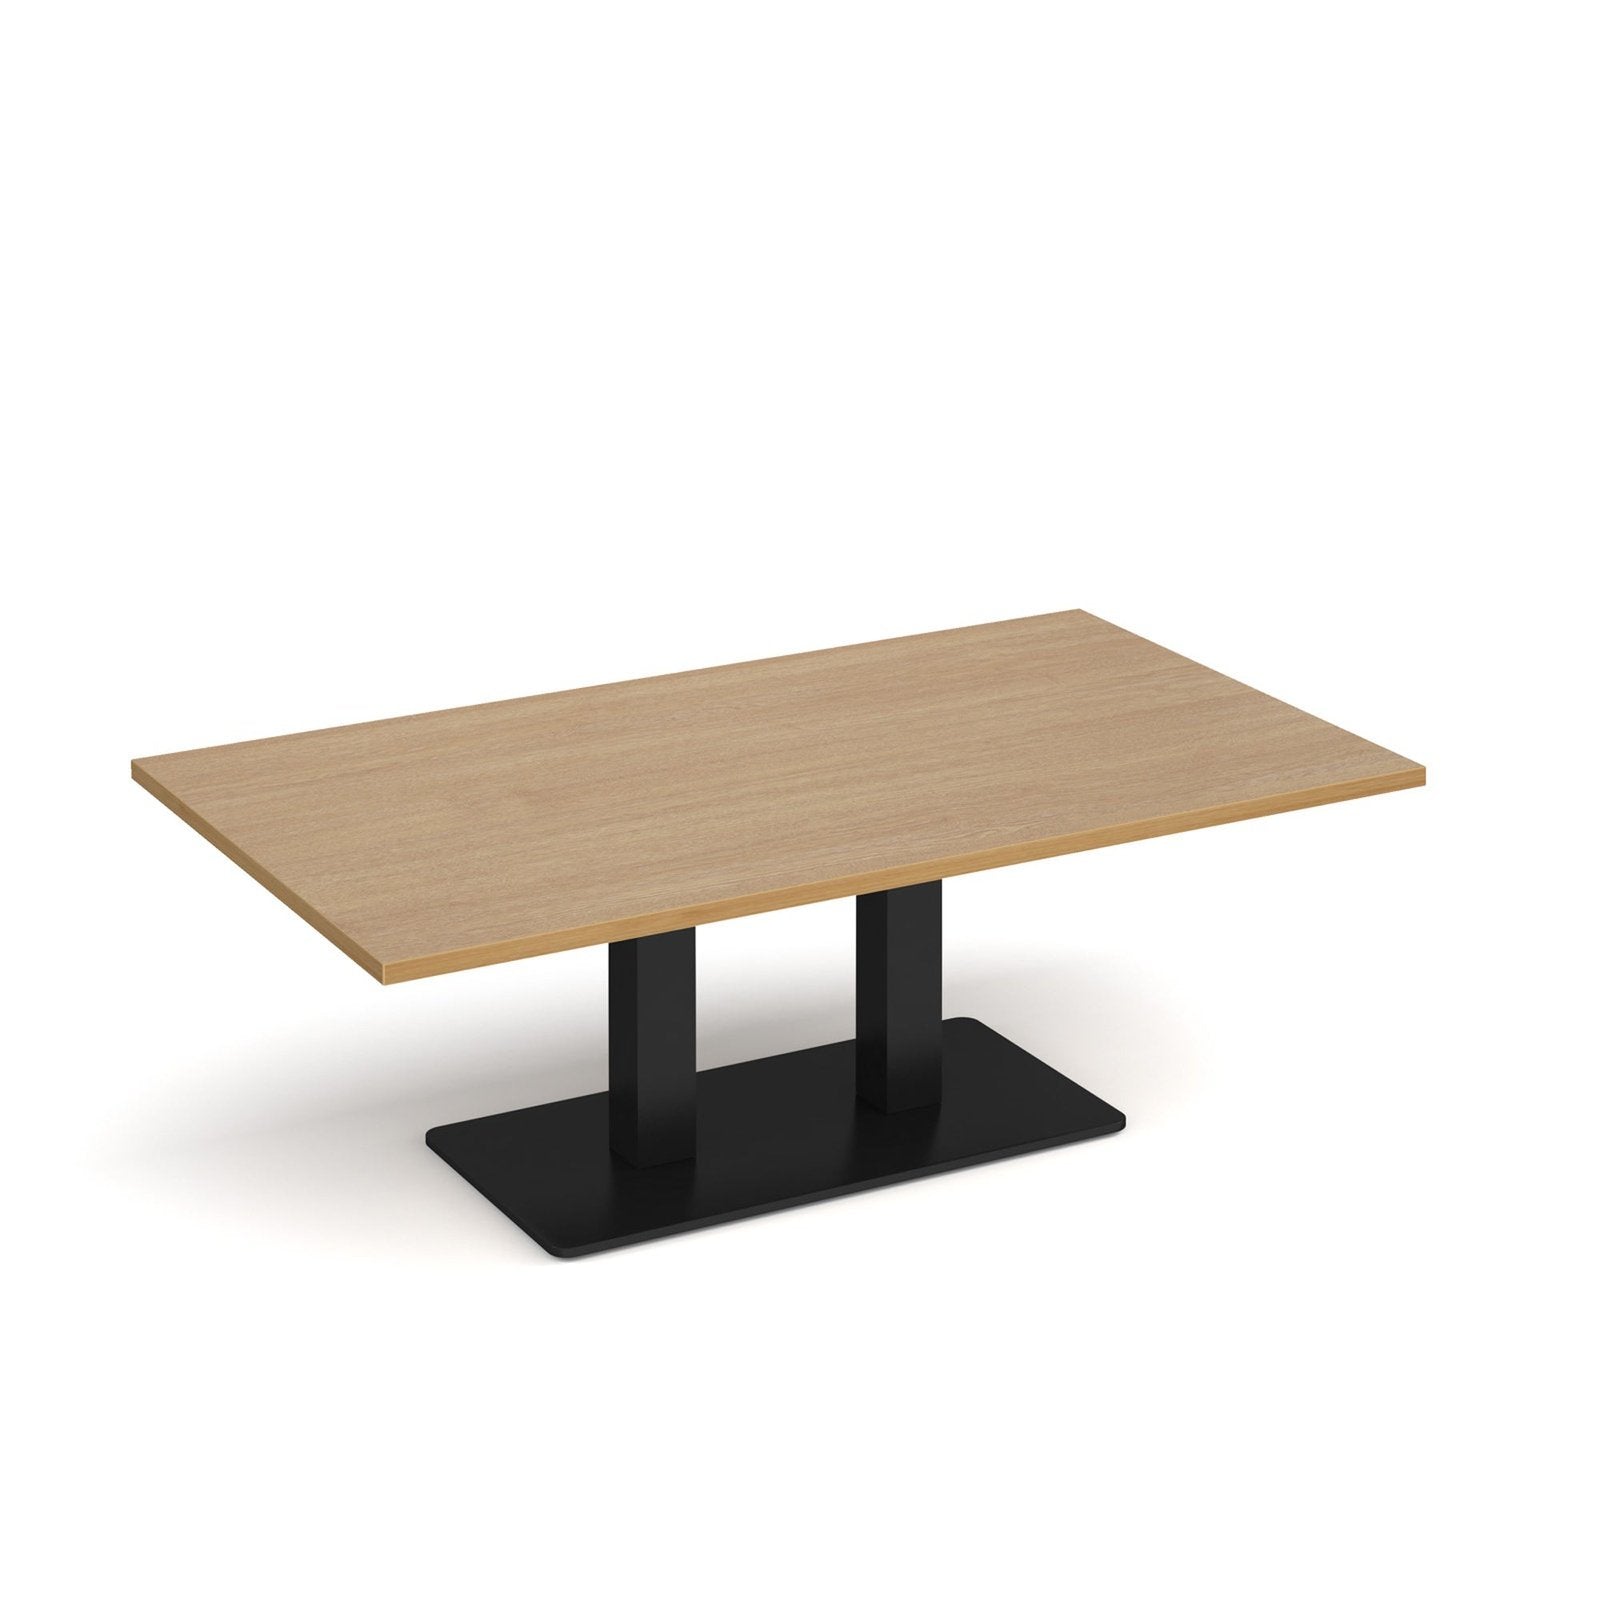 Eros rectangular coffee table - Office Products Online